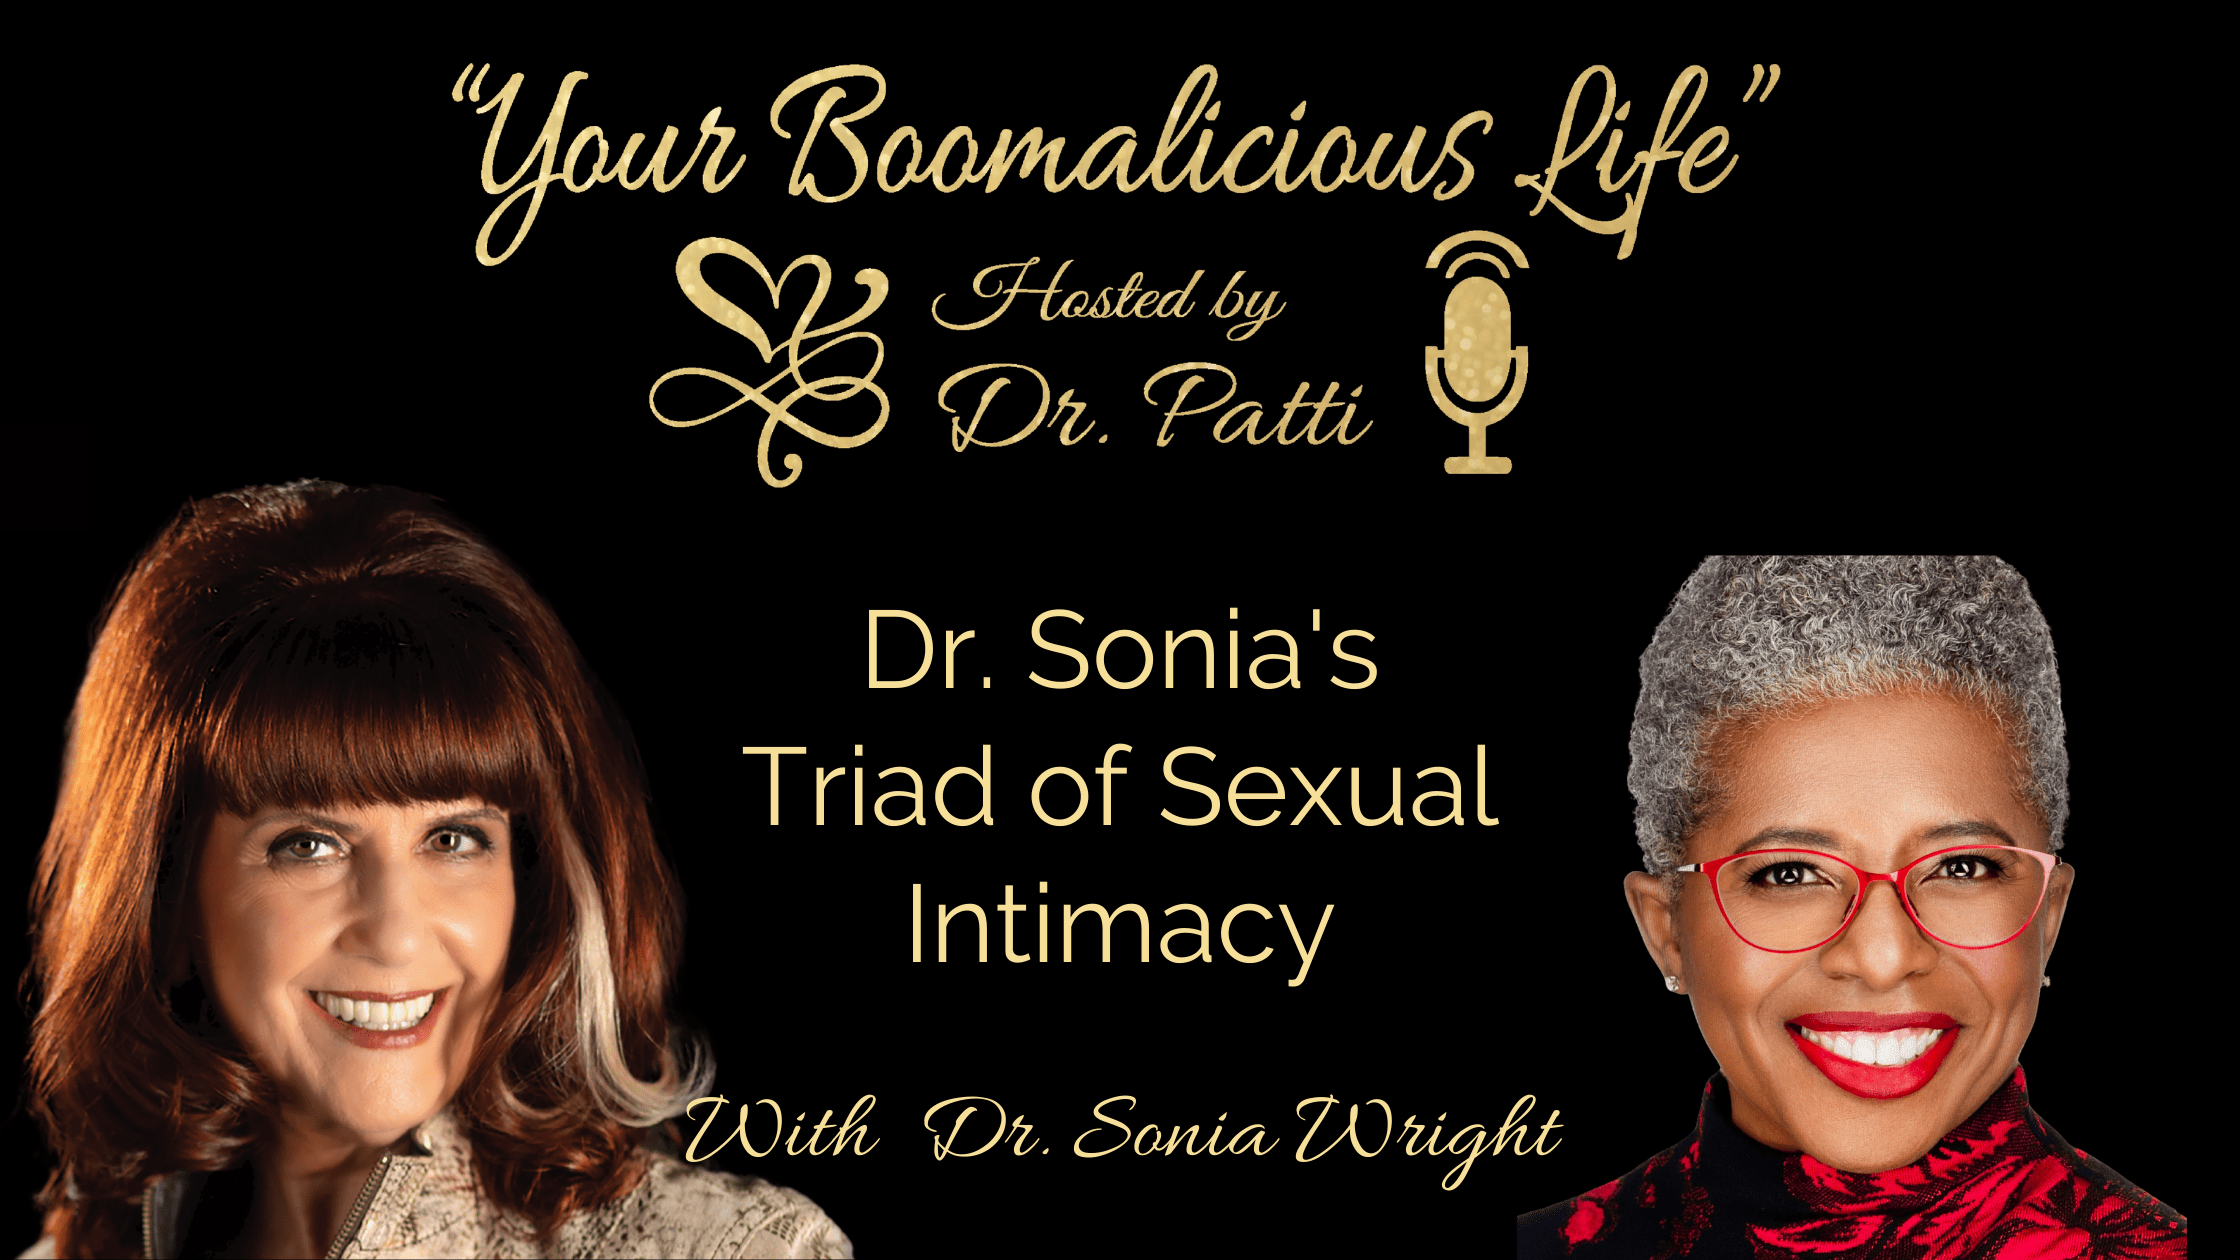 Dr. Patti Britton and Dr. Sonia Wright discuss Dr. Sonia's Triad of Sexual Intimacy